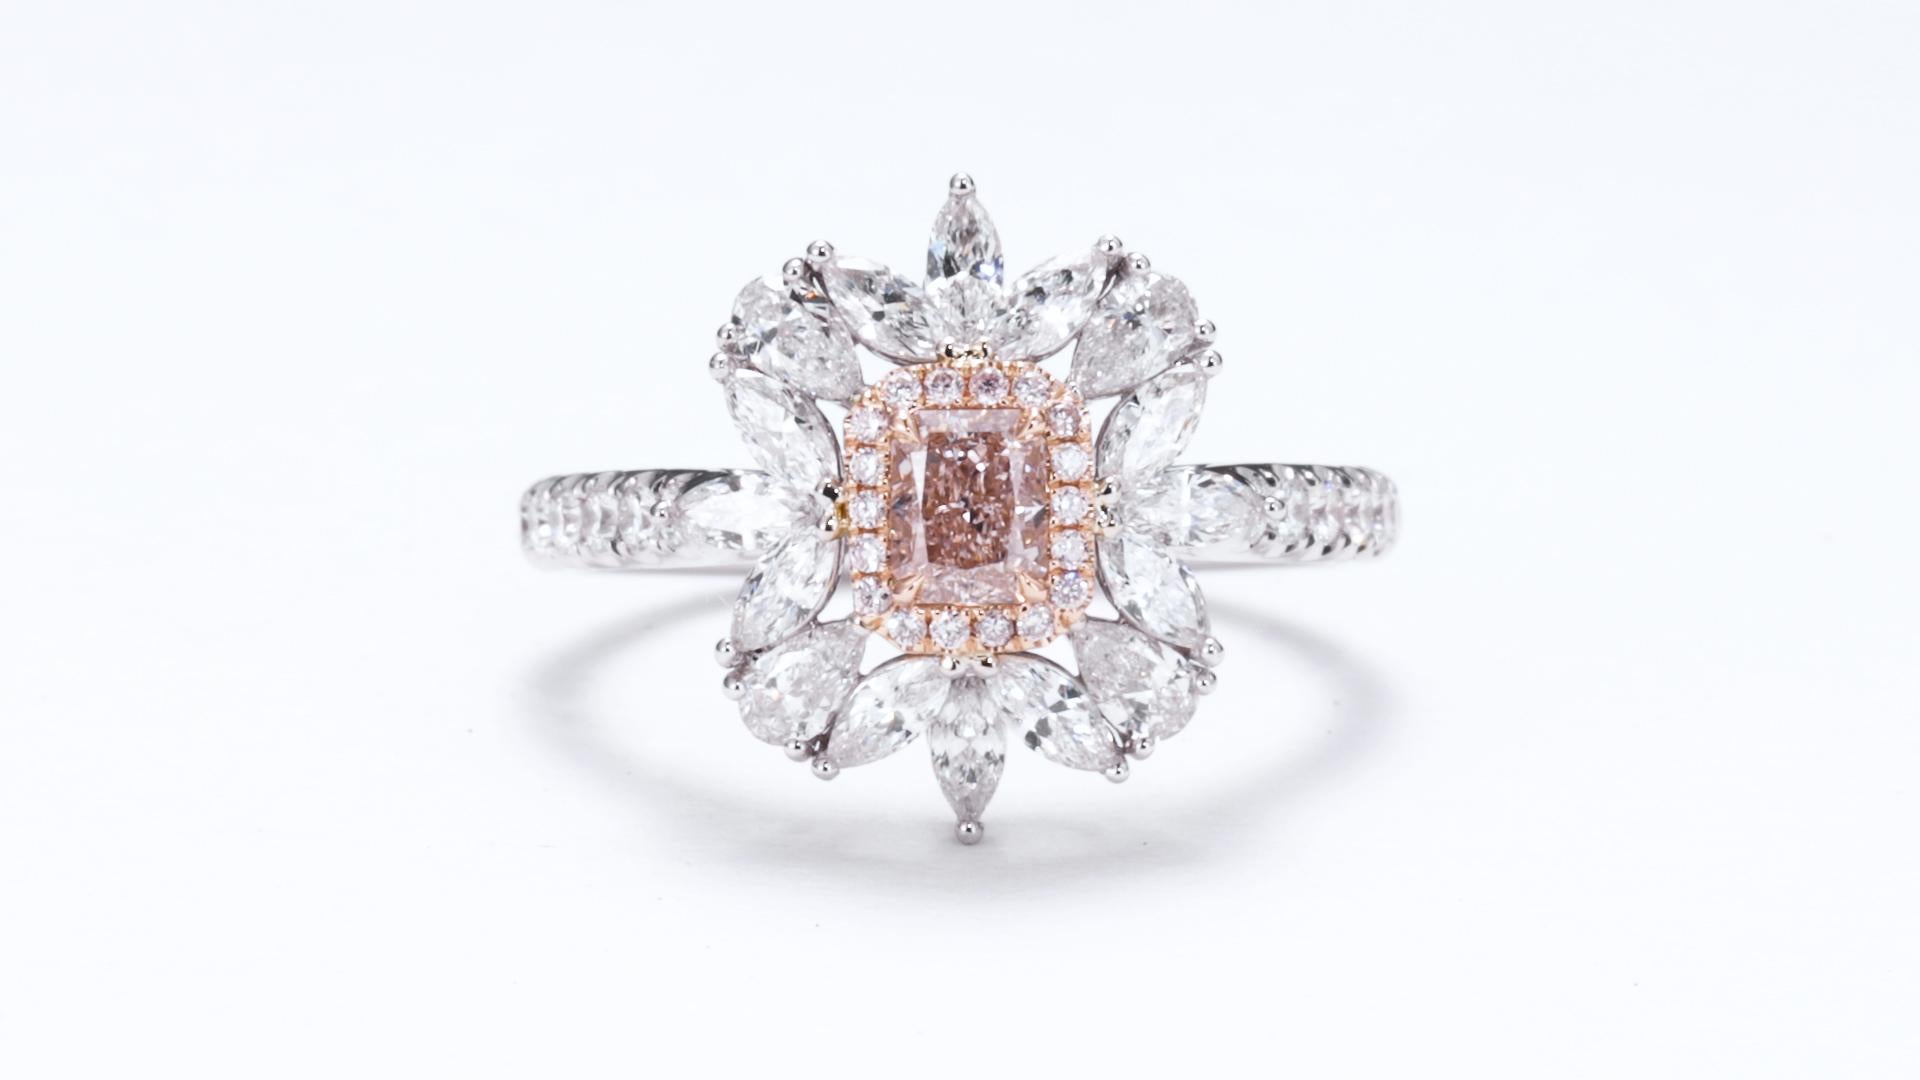 Diamond Weight and Shape: This exquisite ring features a stunning 0.37ct Natural Fancy Light Orangy Pink diamond, cut into a radiant shape. The radiant cut combines the brilliance of a round diamond with the elegance of an emerald cut, resulting in